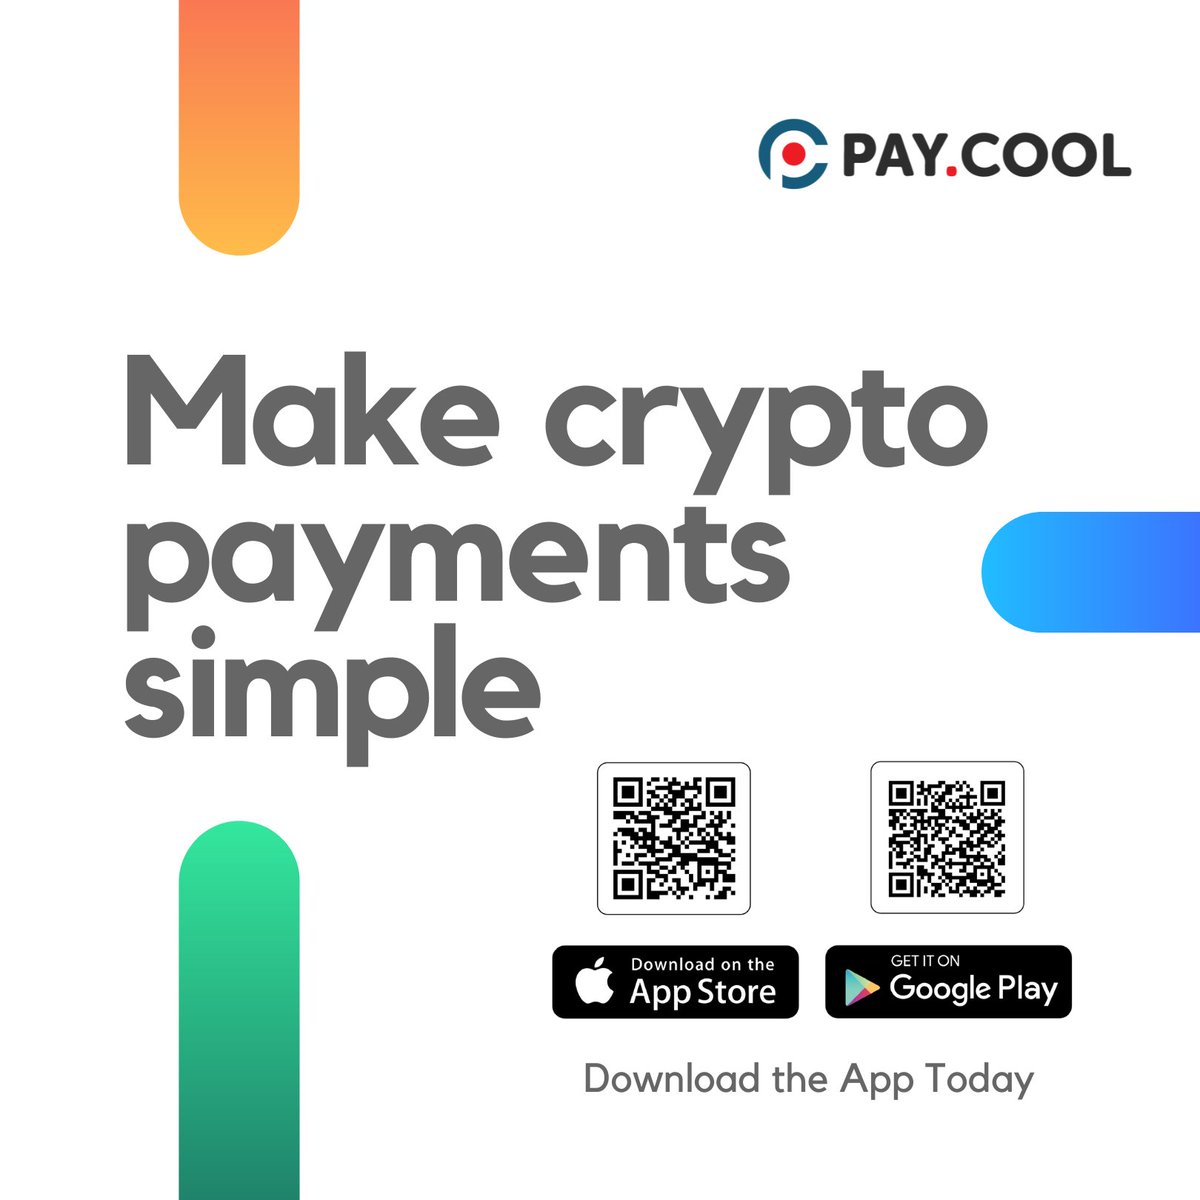 REMINDER: With Pay.Cool, you can easily send and receive payments in multiple #cryptocurrencies, anytime and anywhere! 🌎📷#CryptoPayments #CryptoAssets #Cryptocurrency #NoFees #HighEfficiency #cryptocurrency #payment